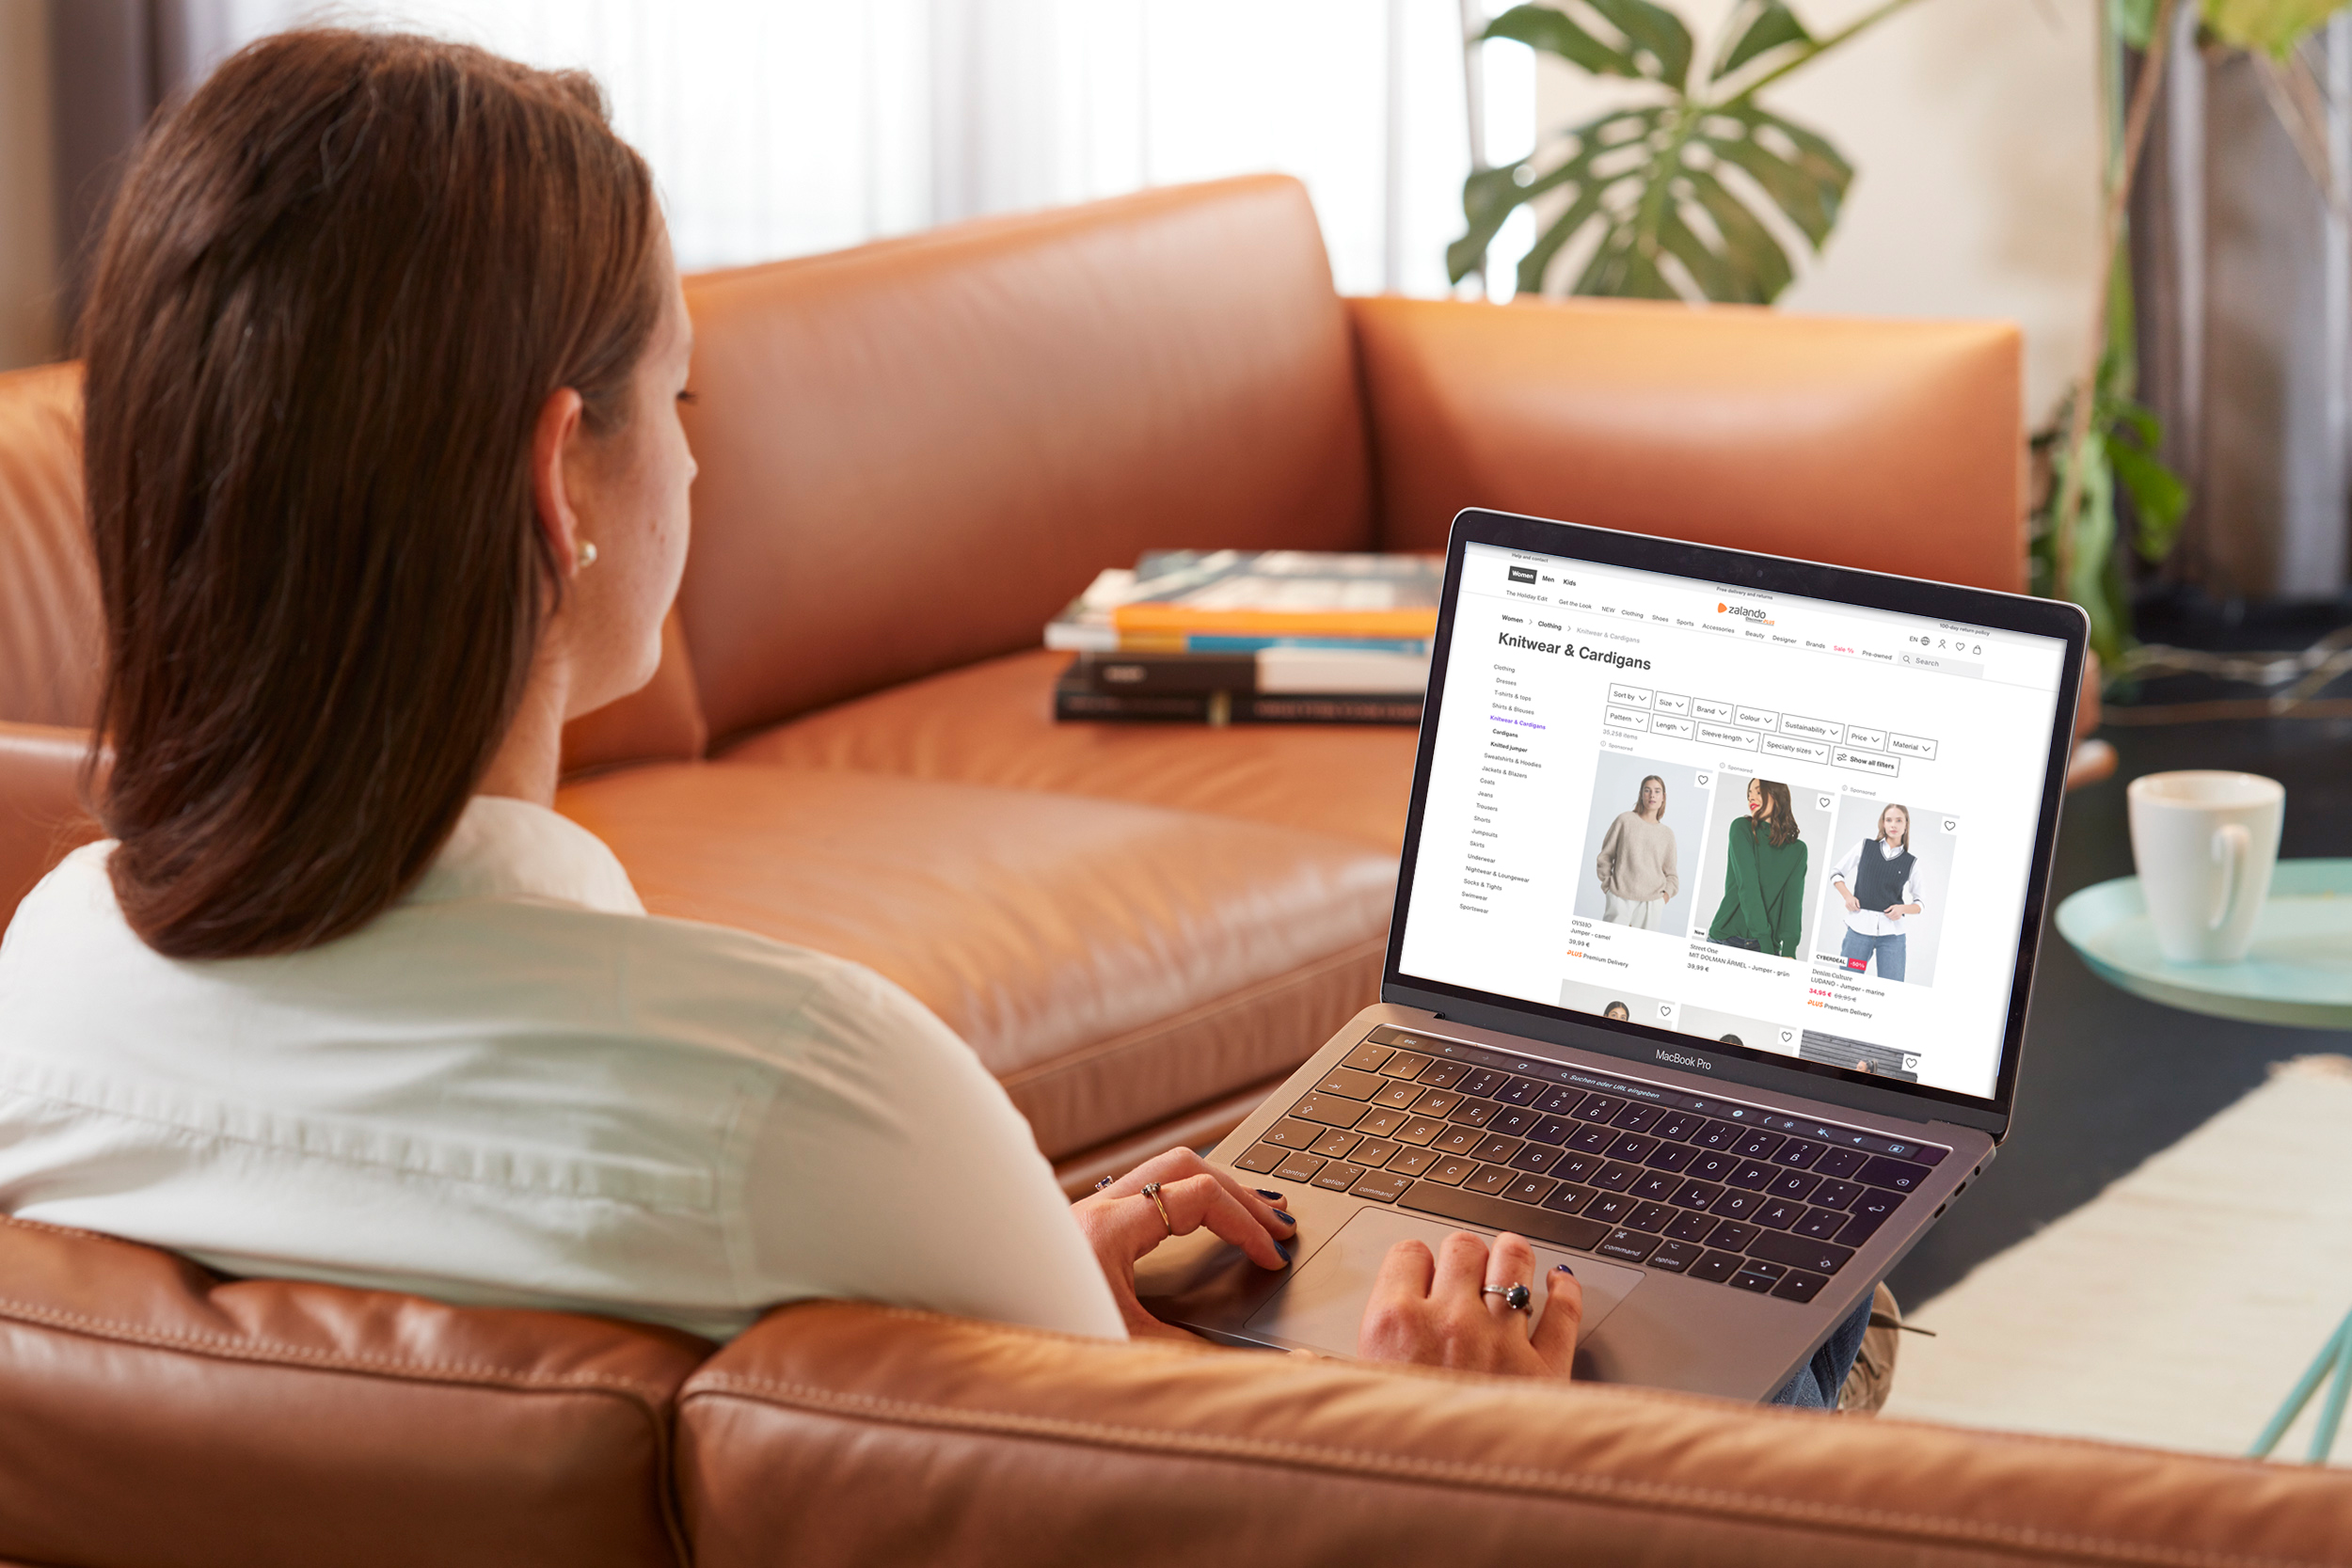 Zalando customer browsing the webshop from her sofa on a laptop computer